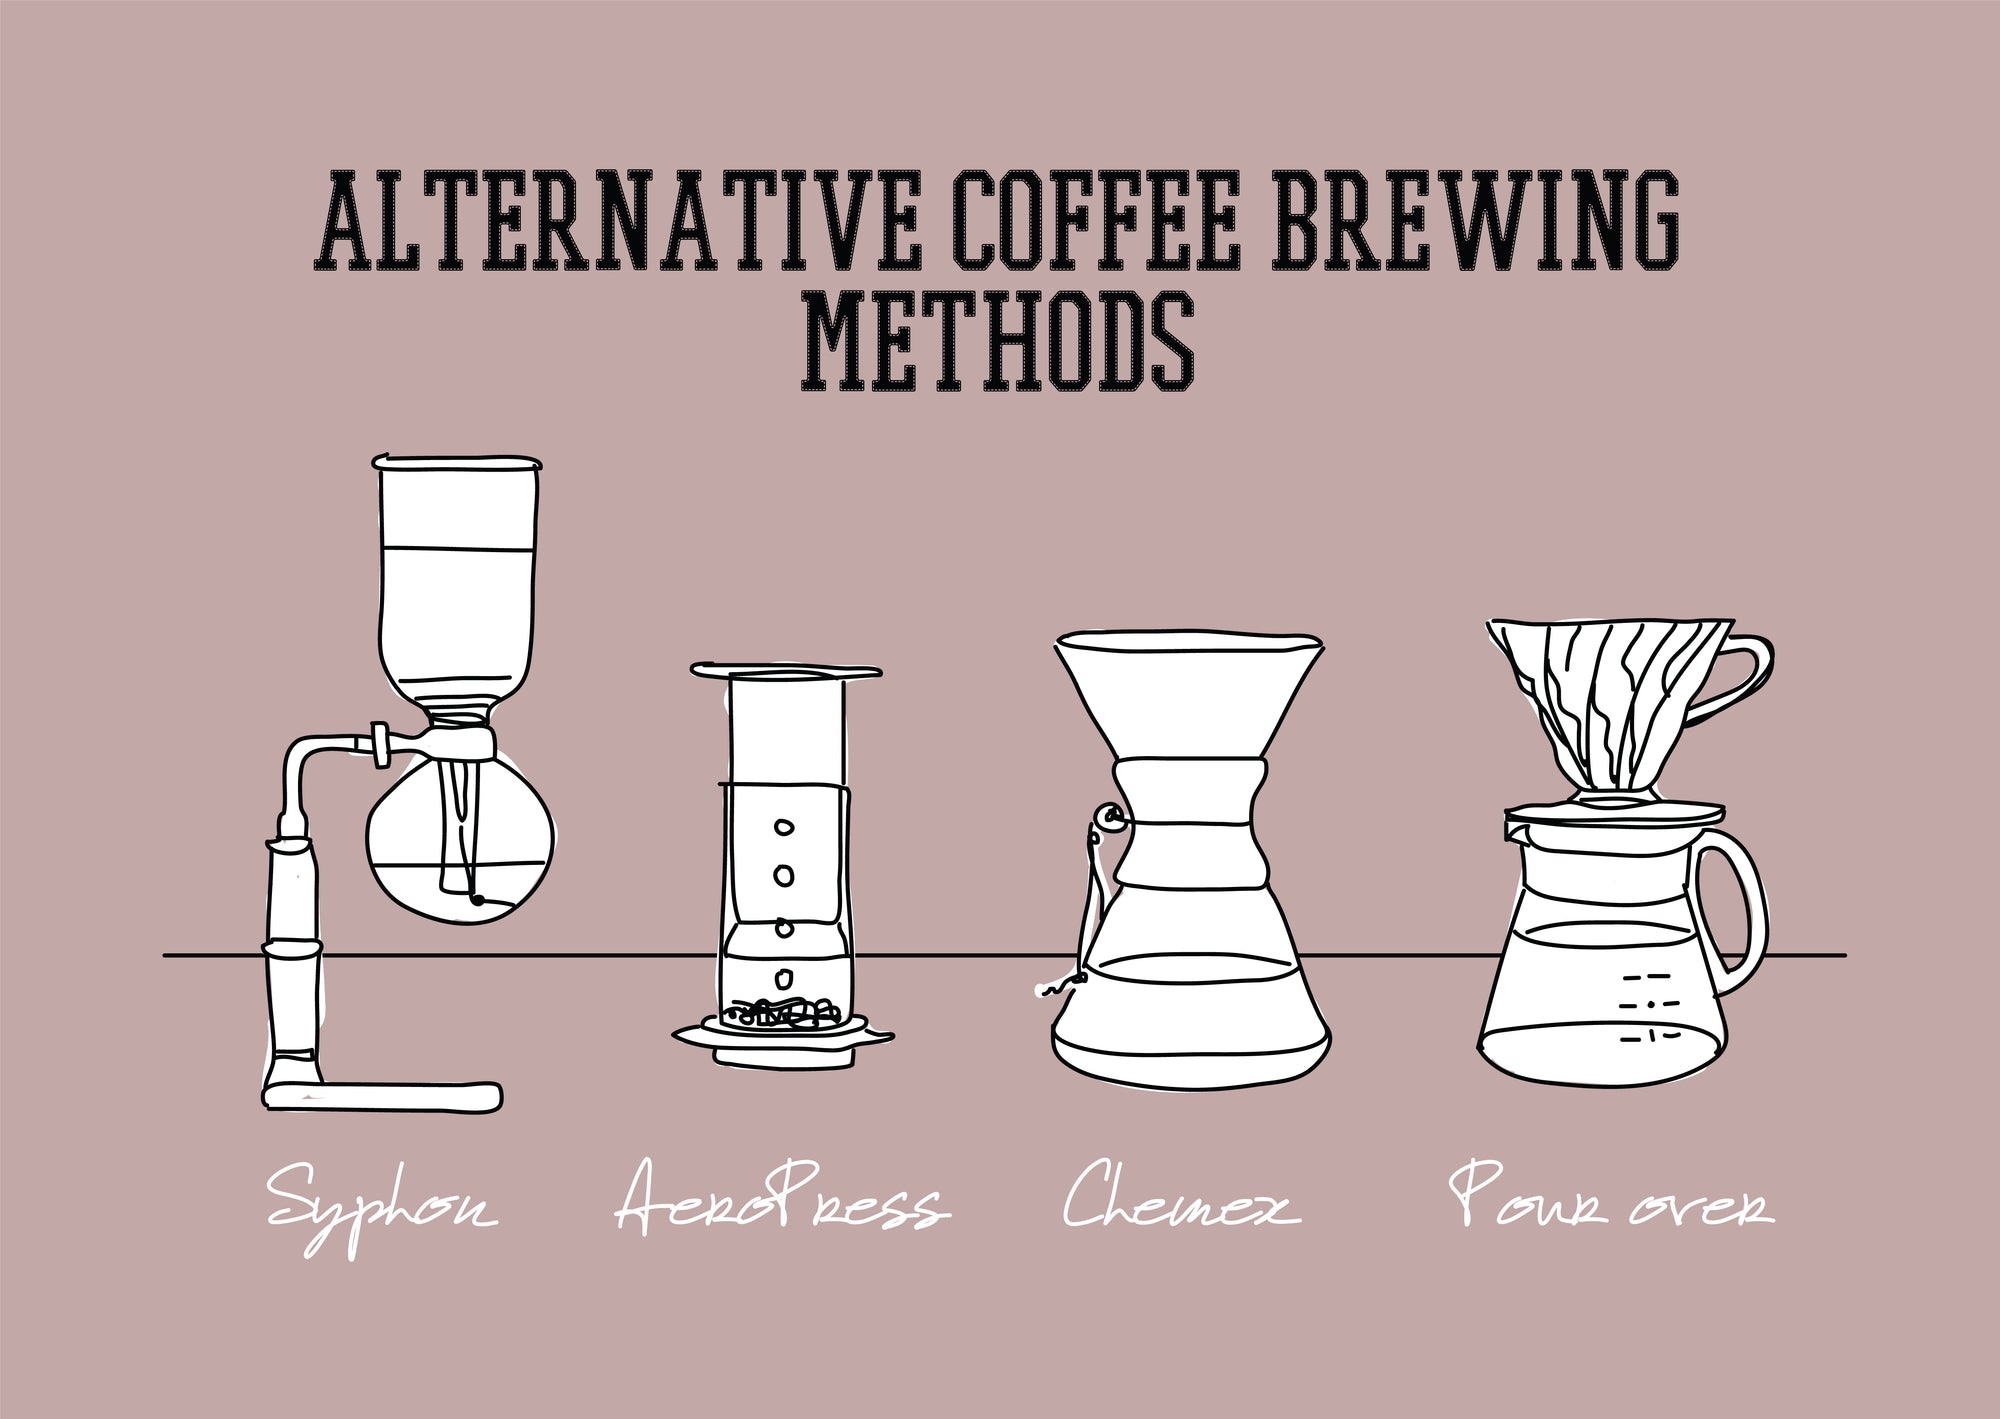 Pour Over vs. Drip Coffee: Which Brewing Method Is Better?